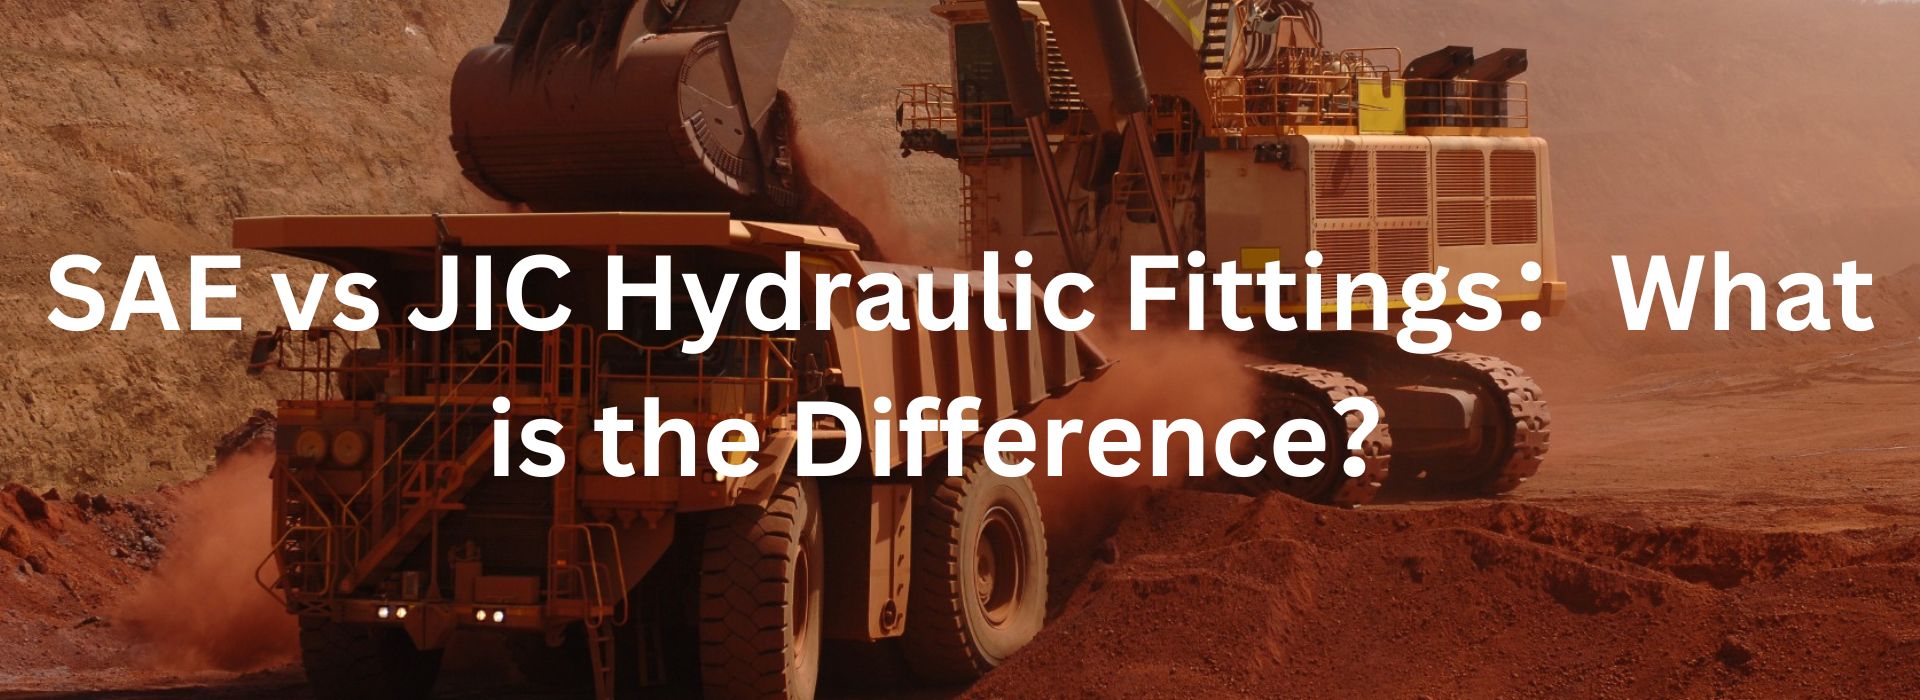 SAE vs JIC Hydraulic Fittings：What is the Difference？